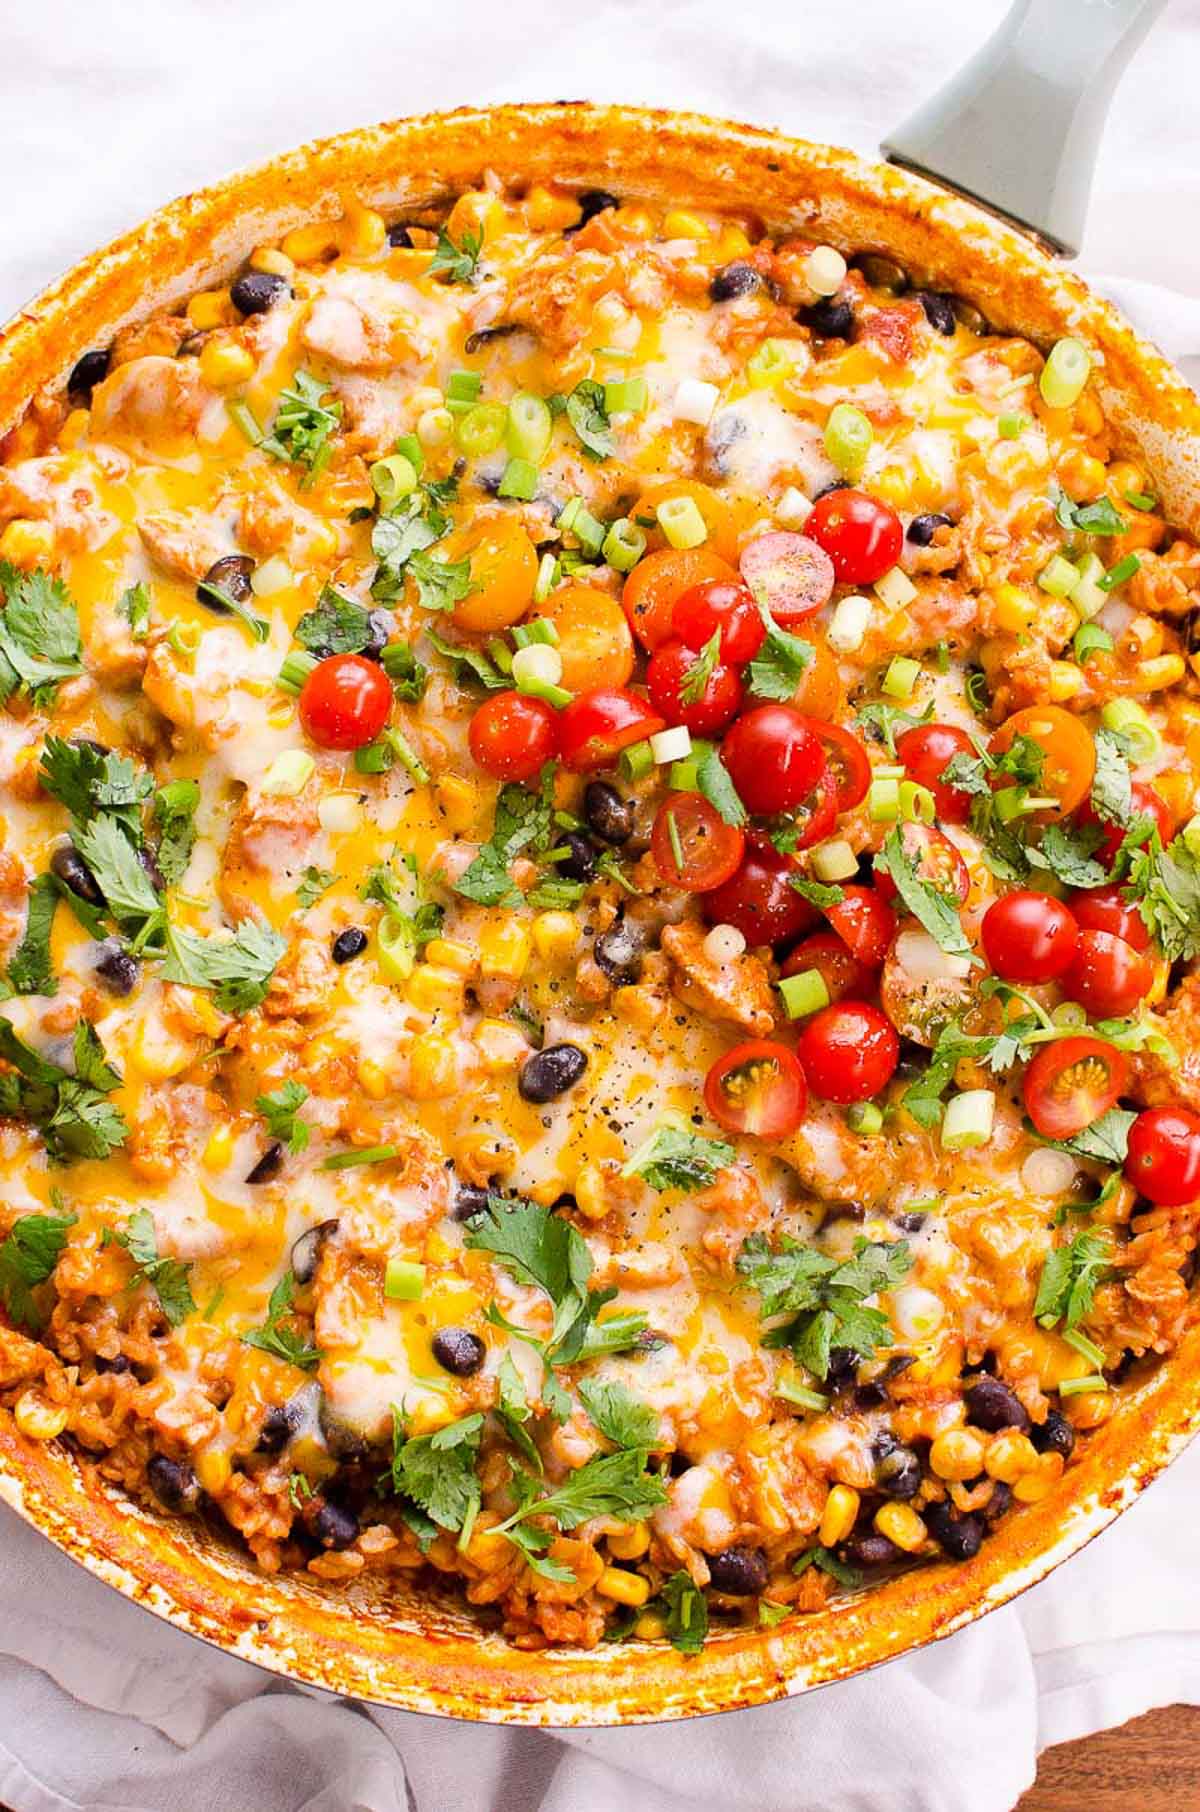 Chicken burrito skillet garnished with cilantro and tomatoes.